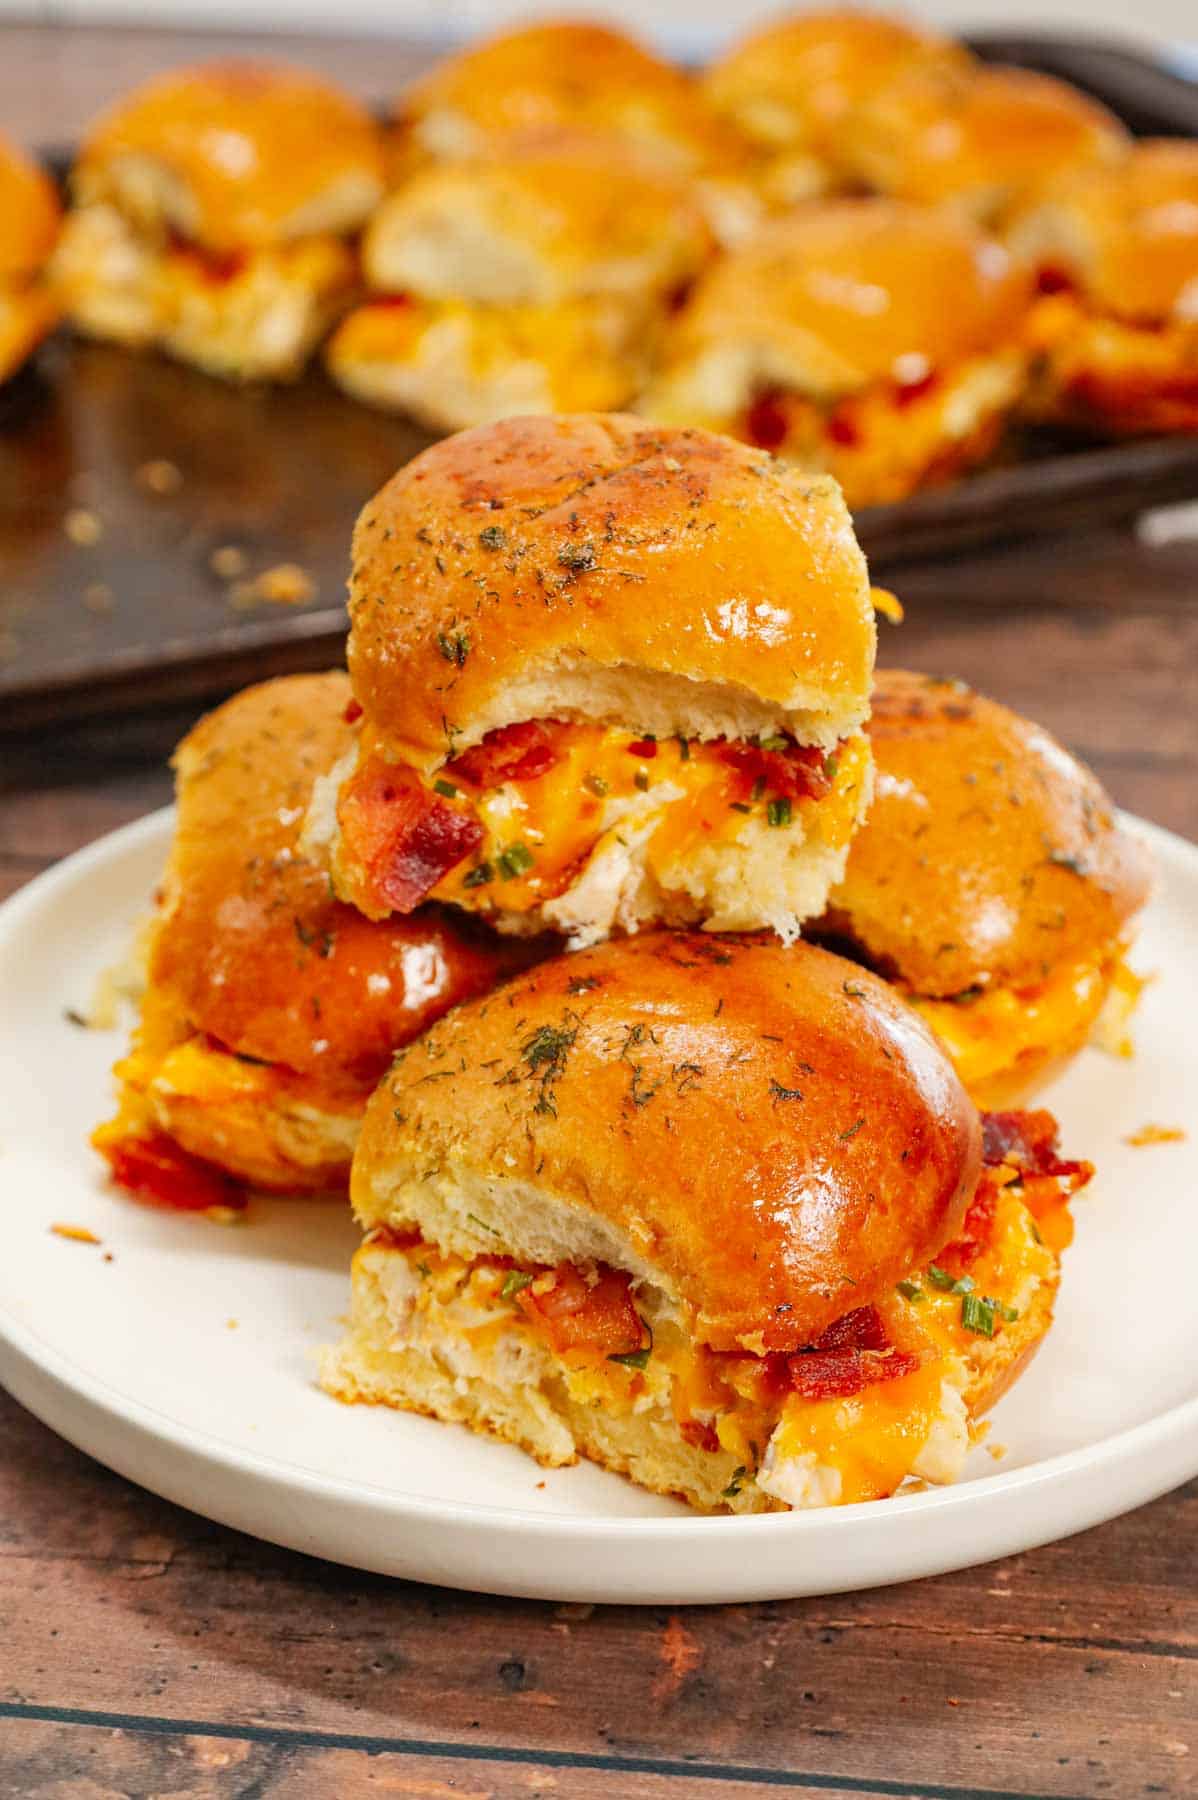 Chicken Bacon Ranch Sliders are the perfect handheld sandwich loaded with shredded rotisserie chicken, crumbled bacon, ranch dressing, chives and cheddar cheese.